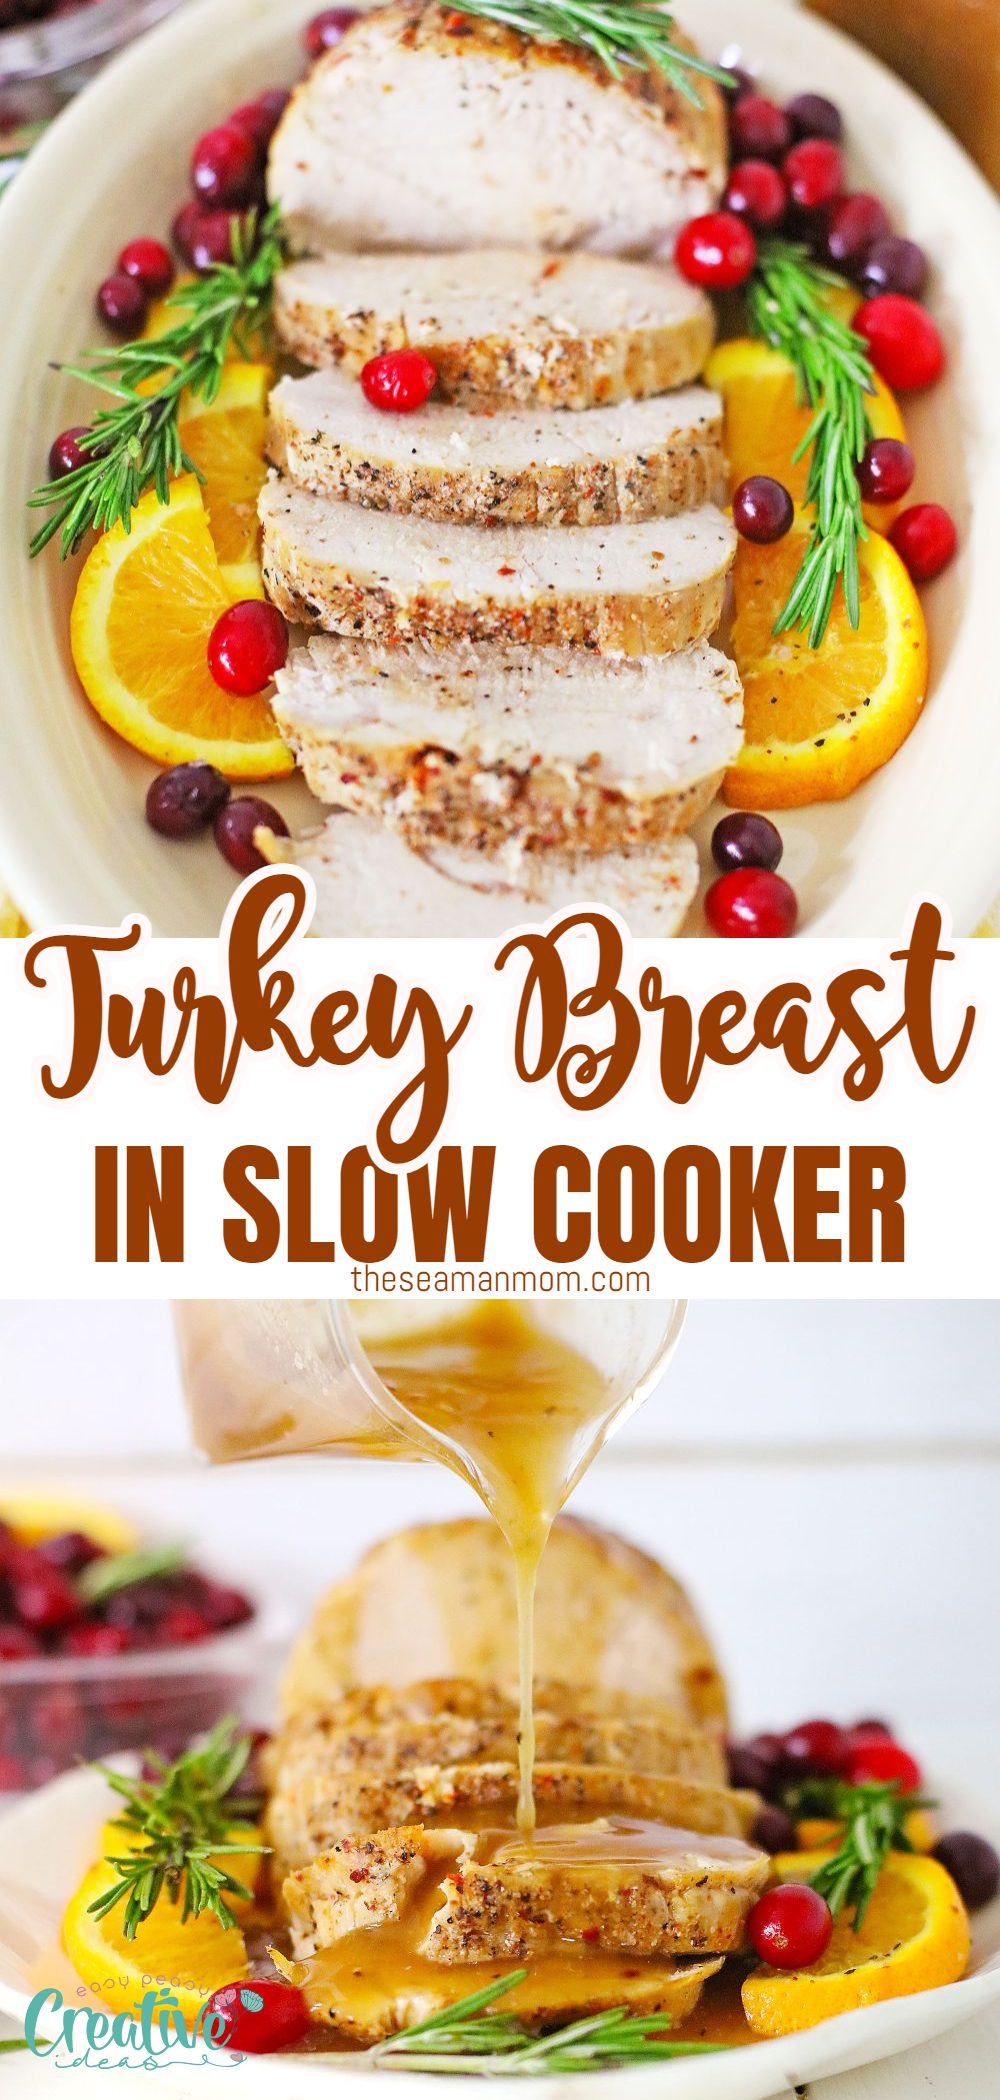 Looking for an easy and delicious way to prepare turkey breast? This slow cooker turkey breast is featuring juicy, tender turkey breast cooked to perfection in your crock pot. Simply toss your ingredients into the crock pot and let it do all the work for you – no need to fuss over a hot stove or grill!  via @petroneagu